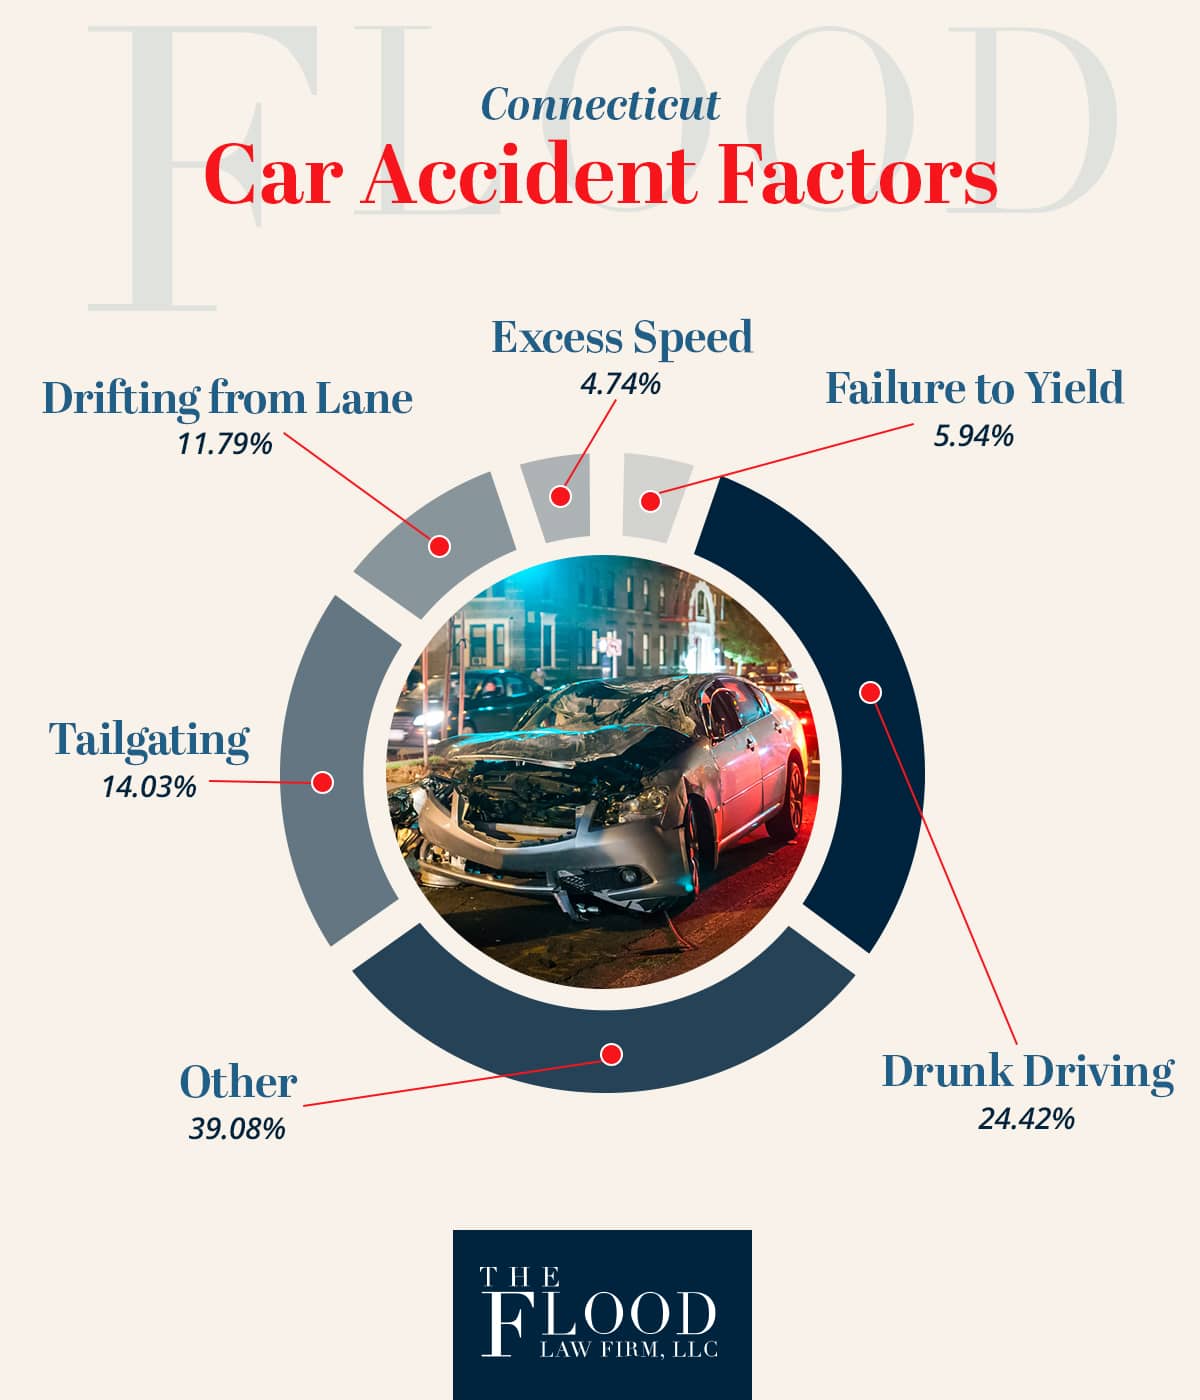 https://www.thefloodlawfirm.com/wp-content/uploads/2021/10/what-causes-car-accidents-in-connecticut.jpg